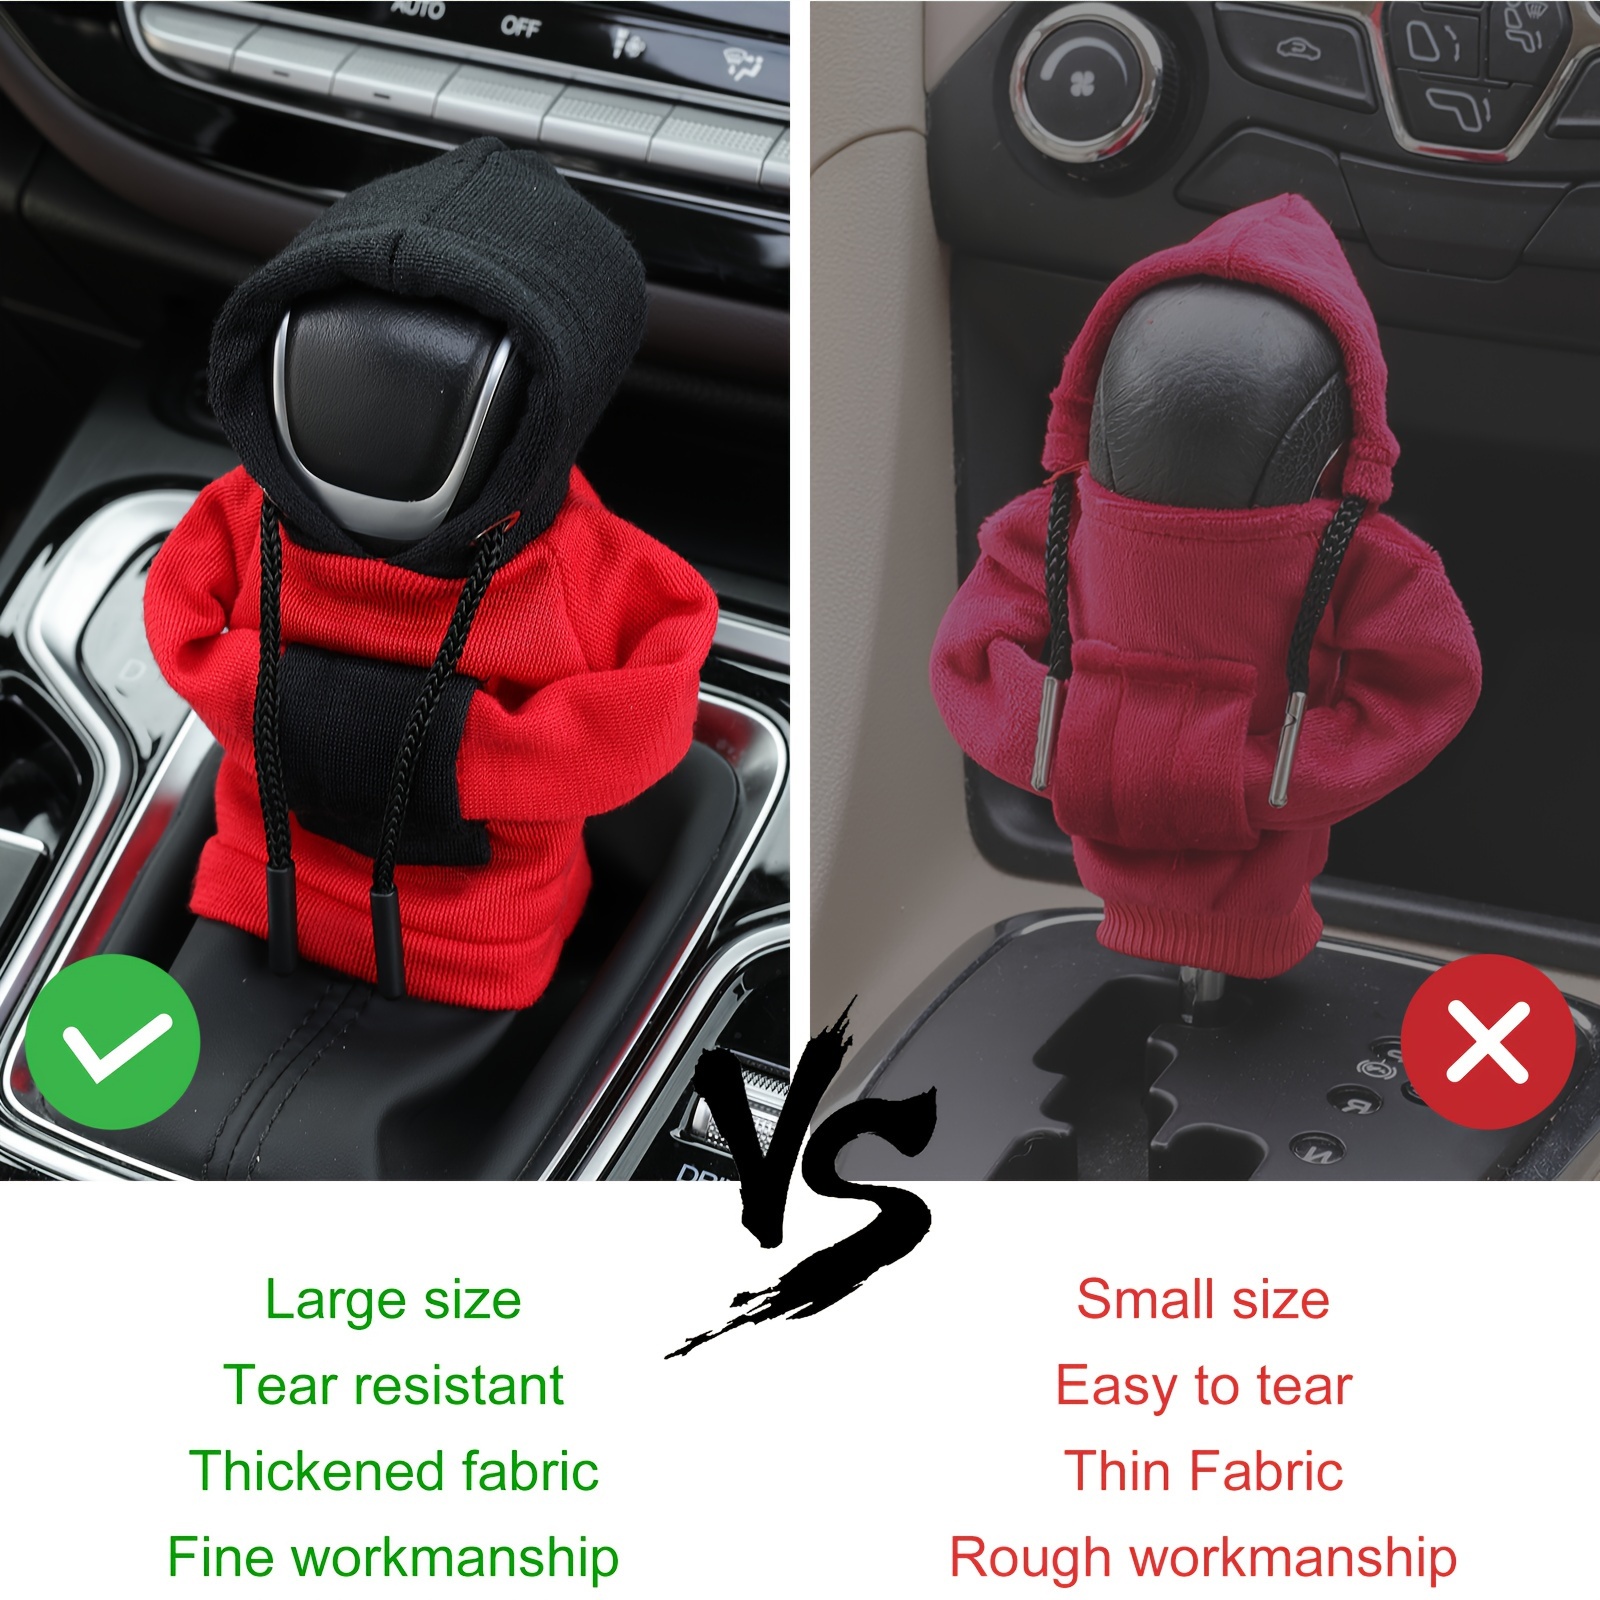 Large Size Universal Car Gear Shift Cover Hoodie, Hooded Sweatshirt for Auto Gear Stick Shifter Knob, Interior Accessories Decor Christmas Gifts